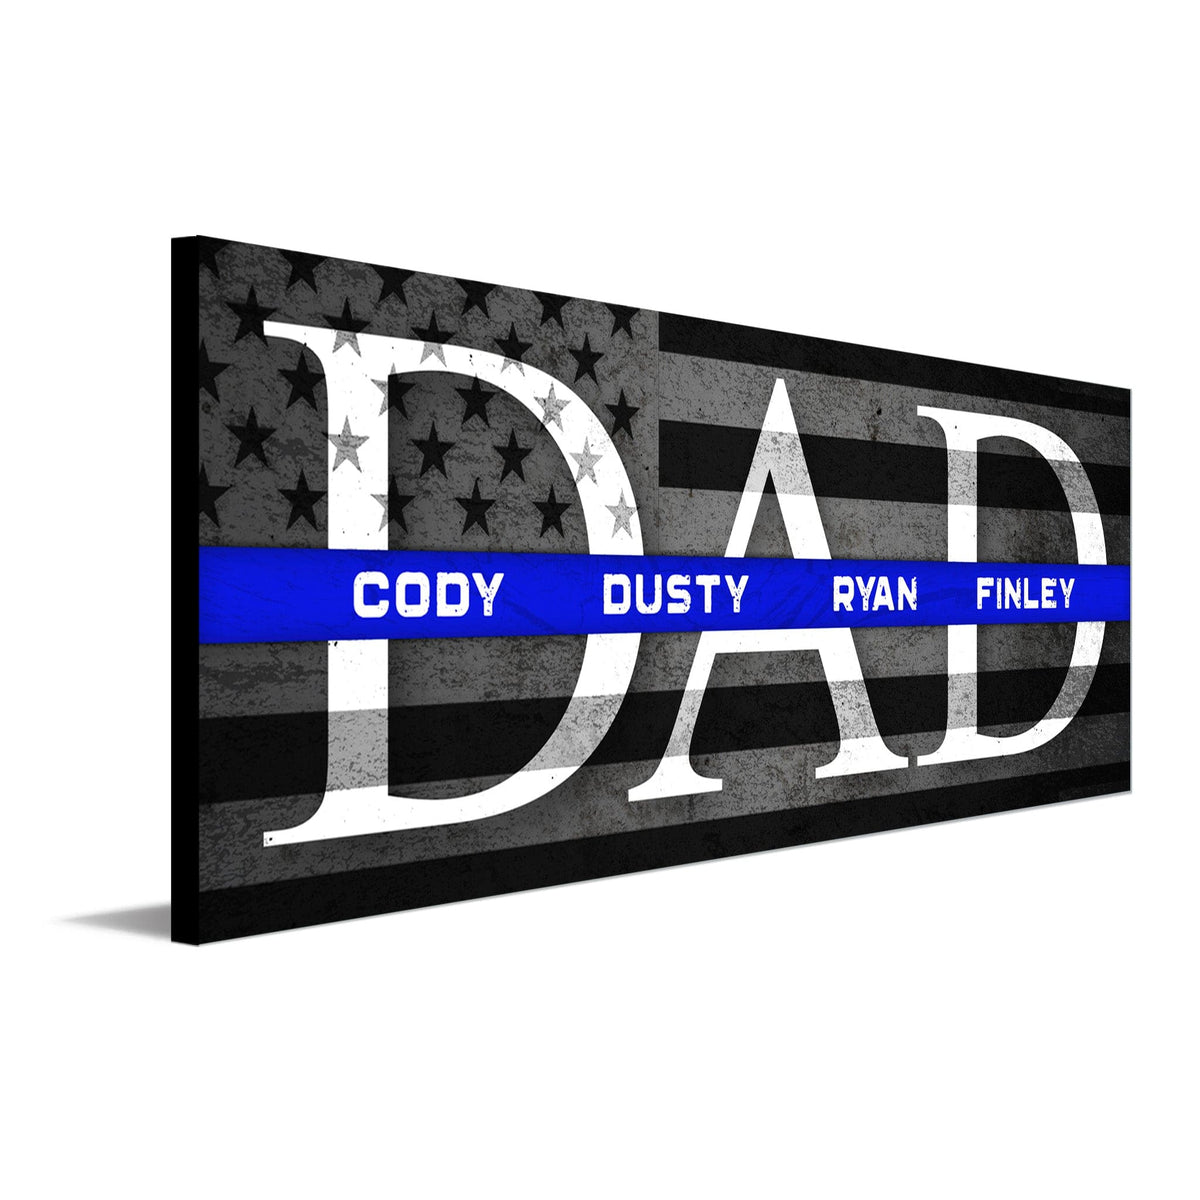 Personalized gift for Dad - block mount option with thin blue line shown